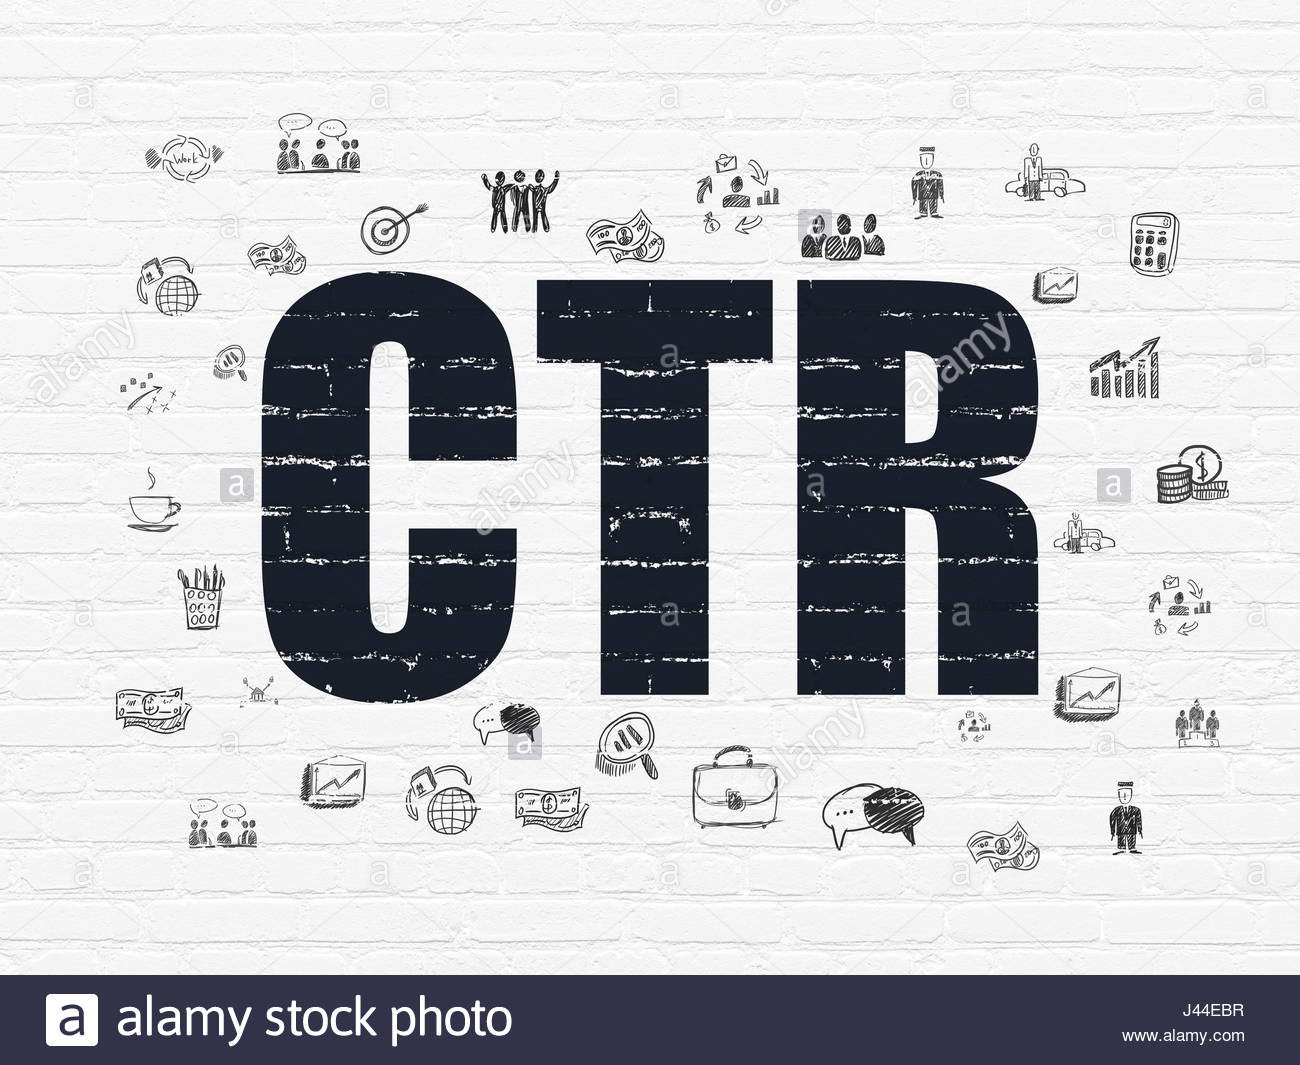 Finance Concept Ctr On Wall Background Stock Photo